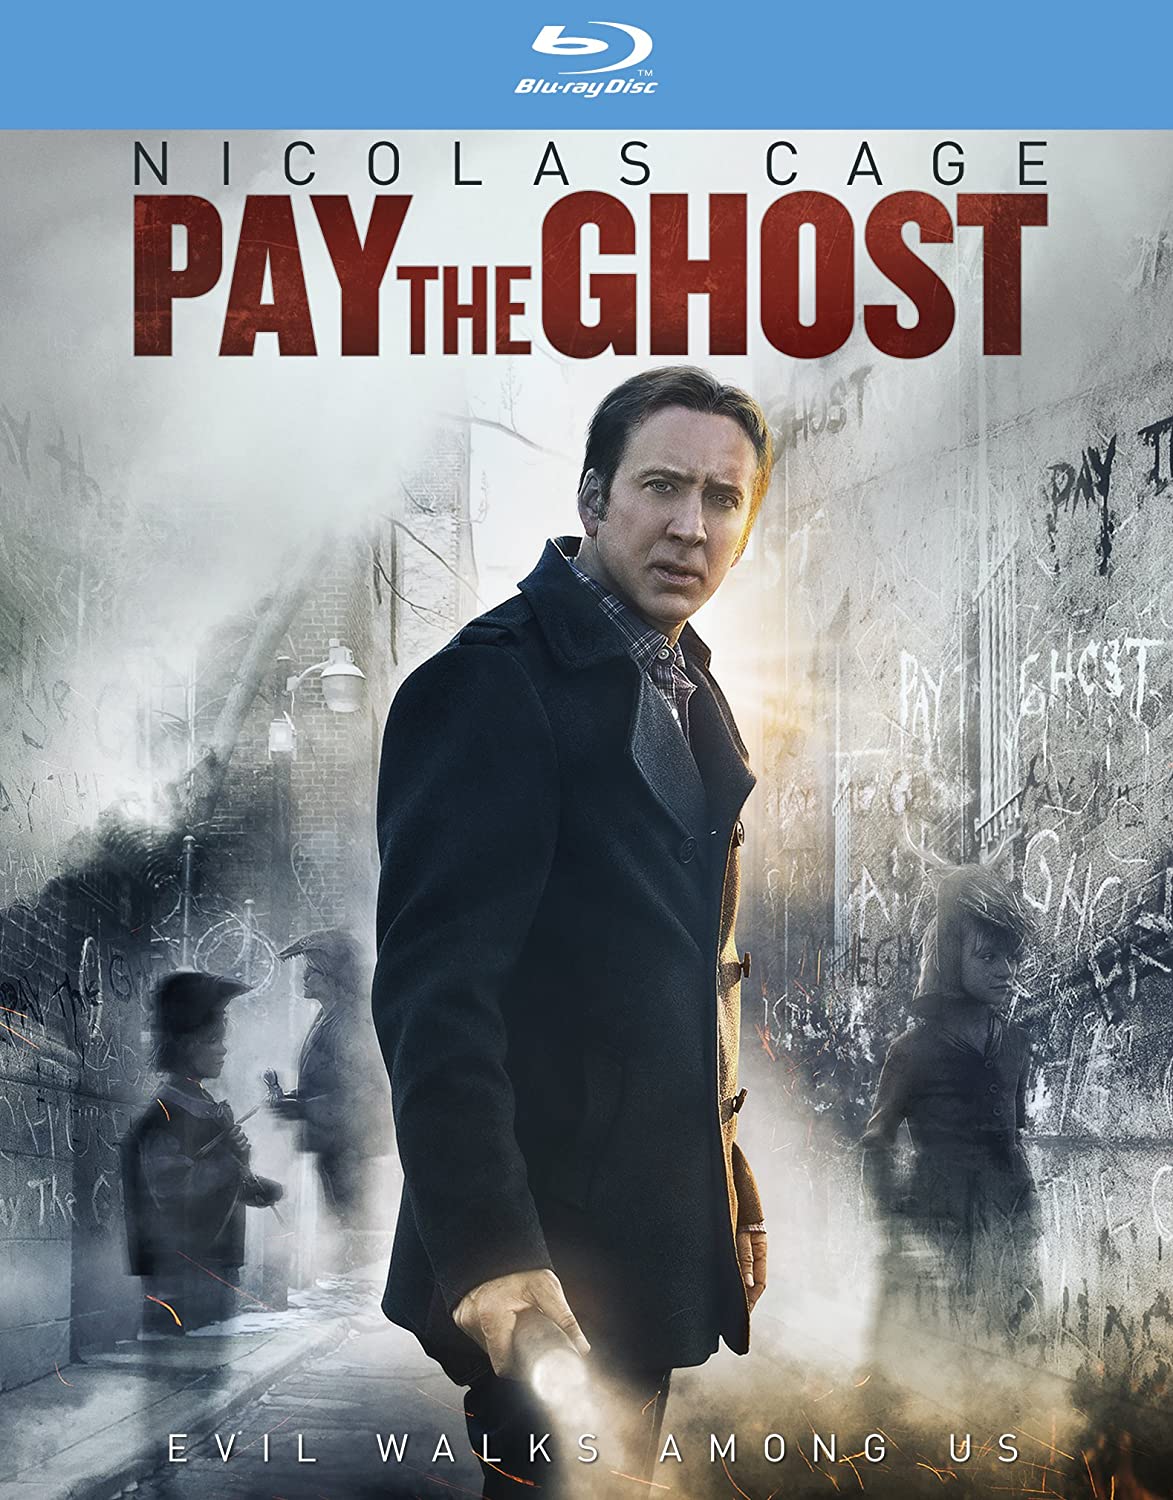 Pay the Ghost Blu-ray